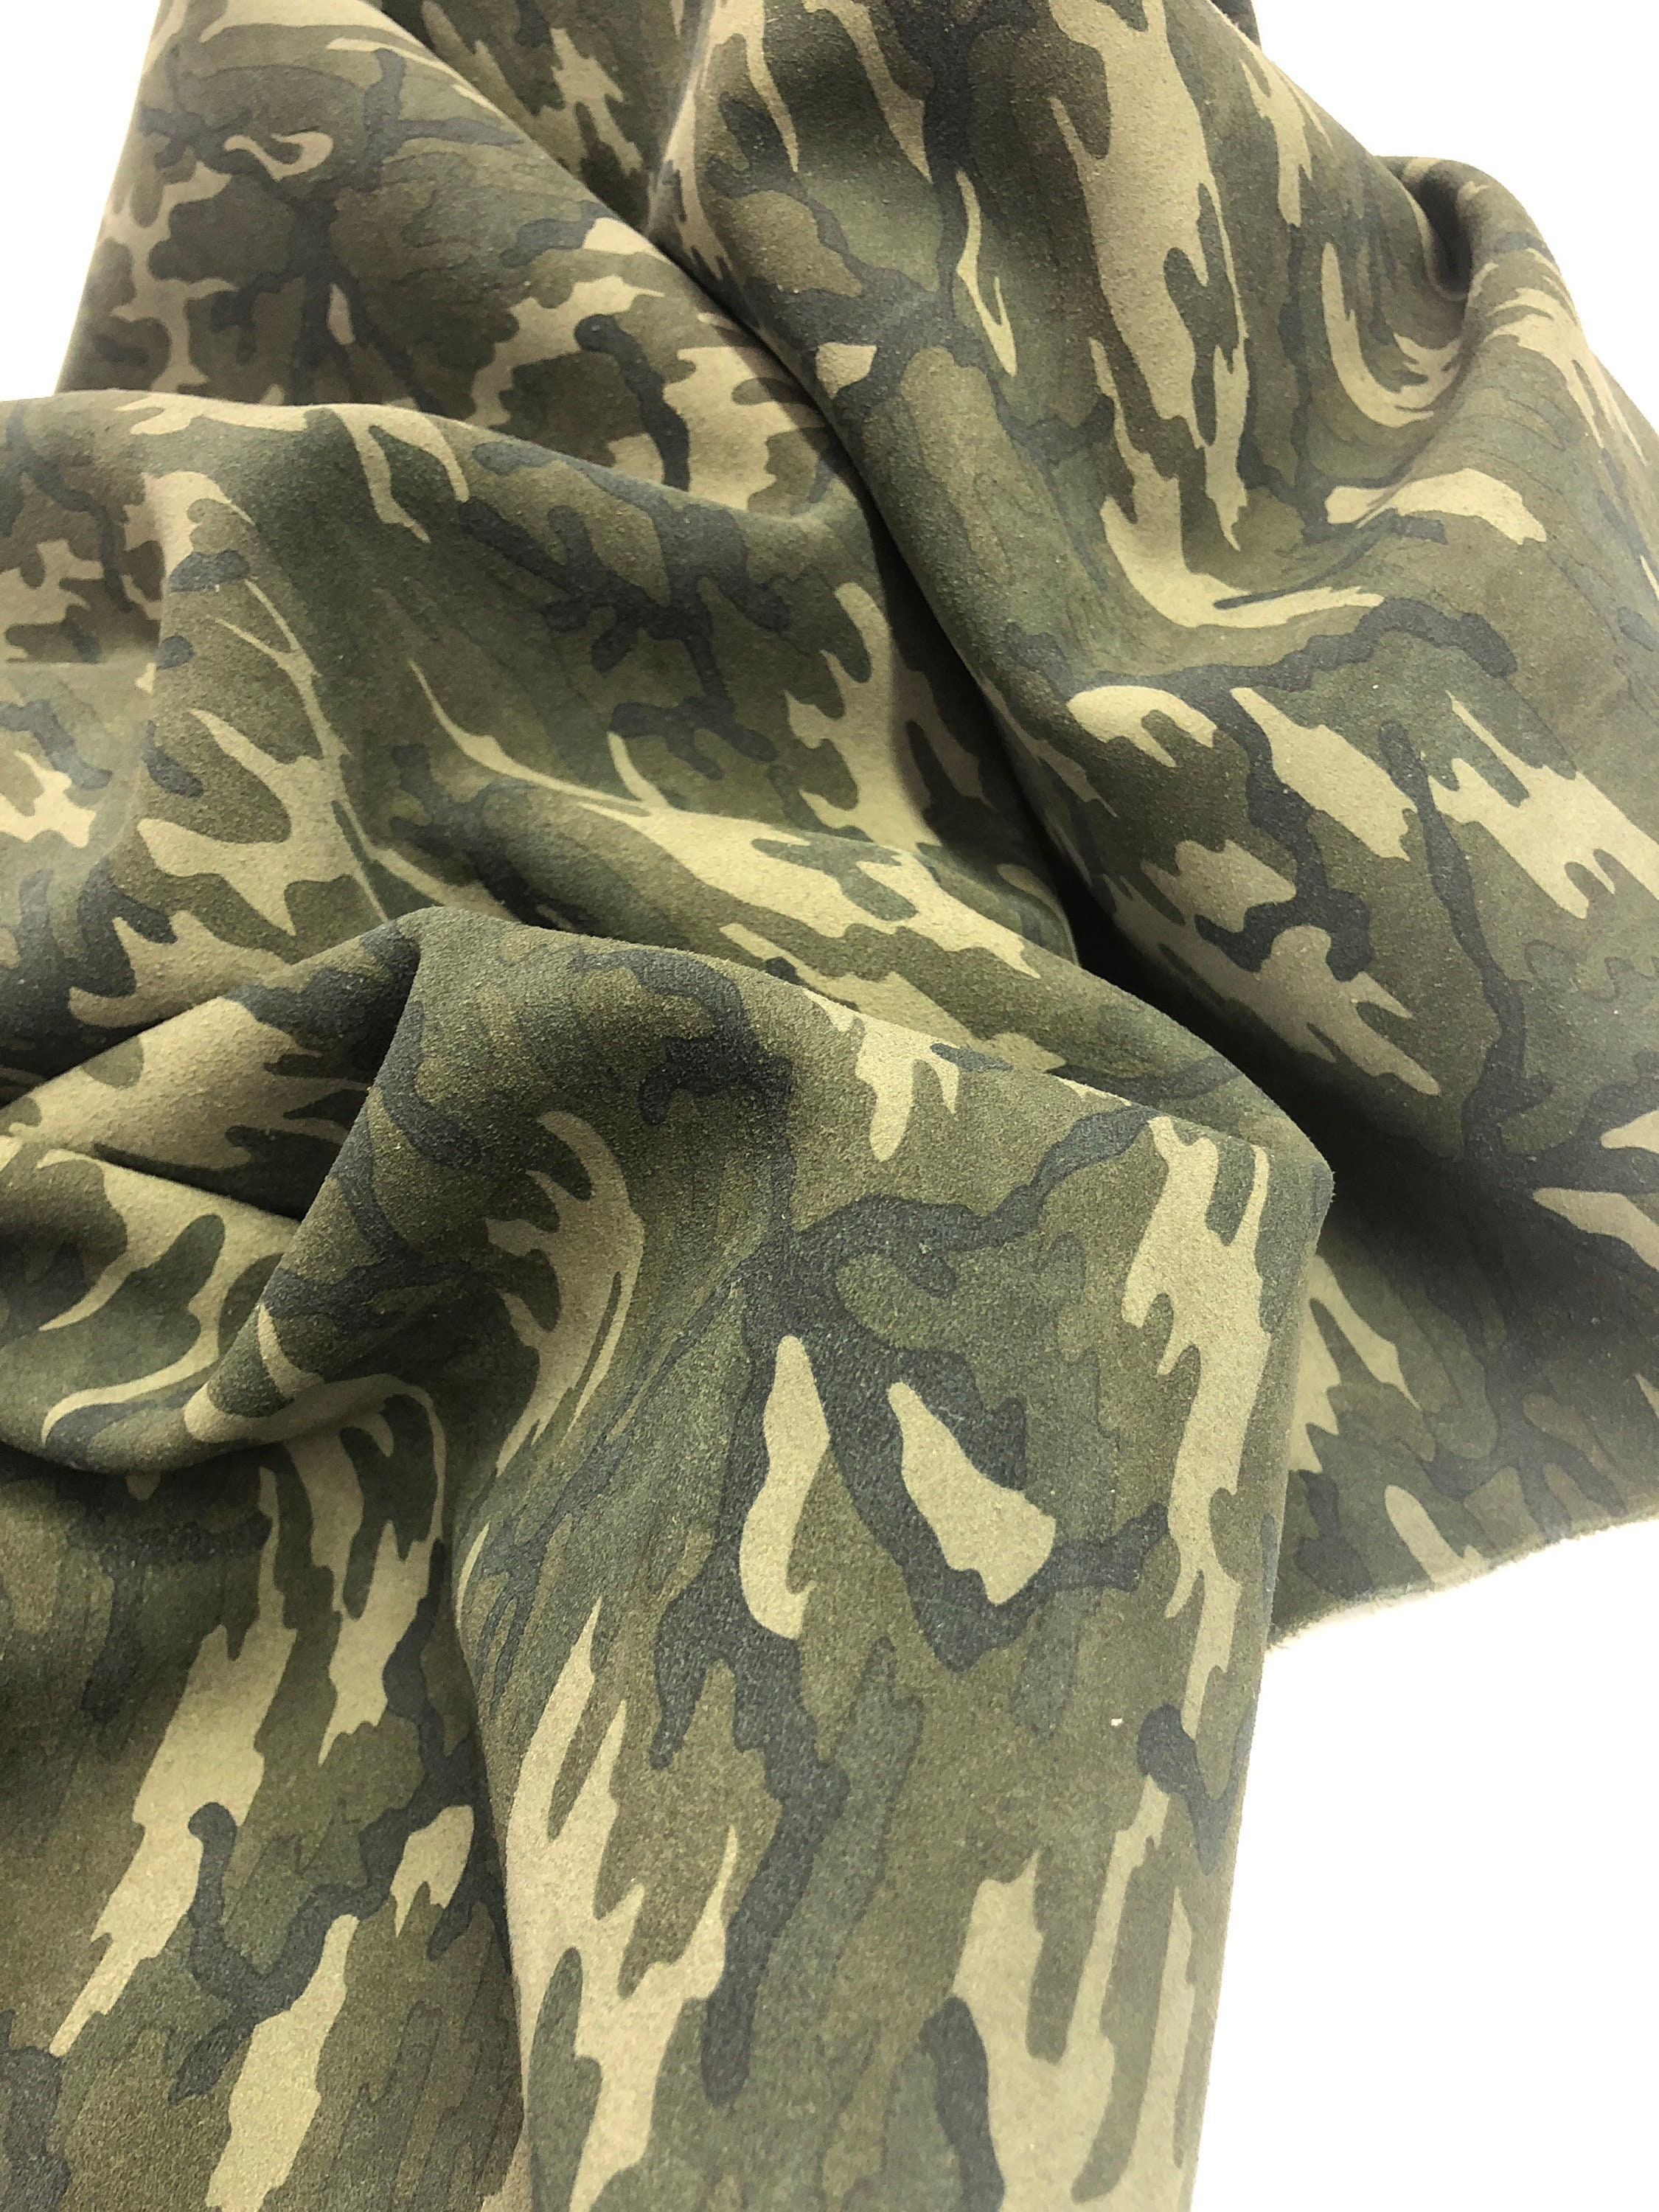 Calfskin Suede Thickness 1.2-1.5mm LEATHER CAMOUFLAGE Suede ARMY Green Light Olive Dark Green or get full skin Black Choose Your Size